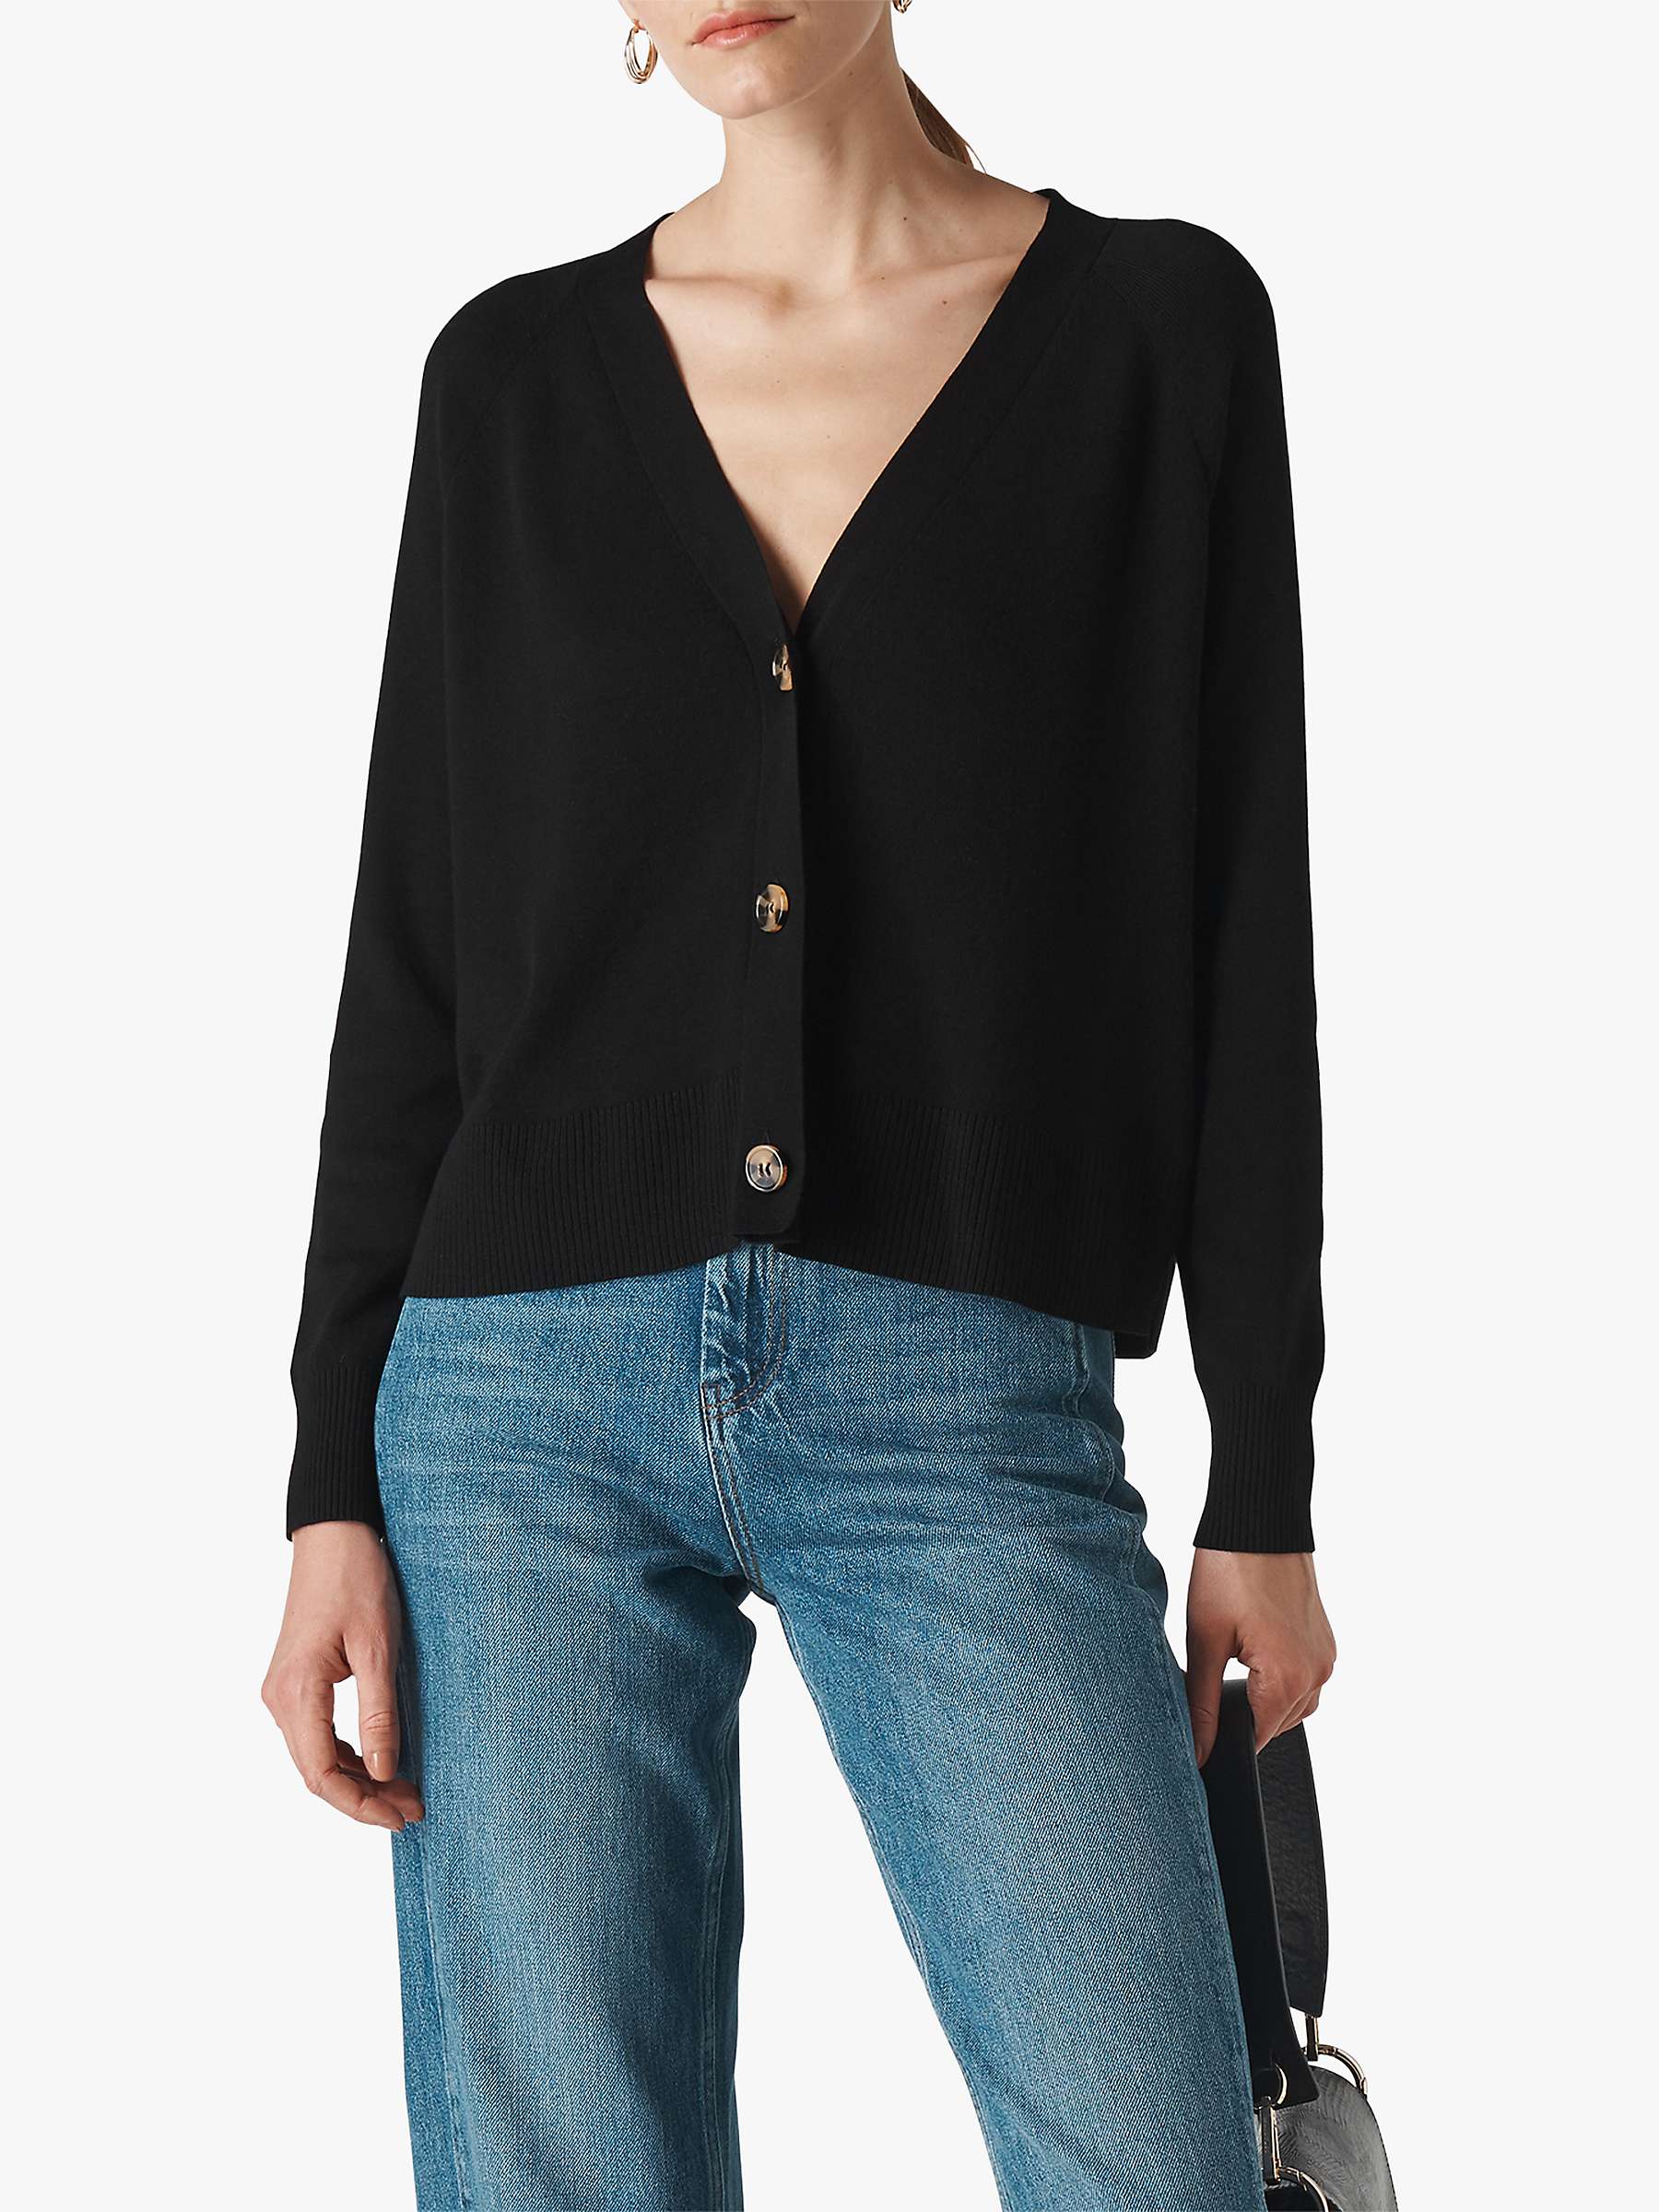 Buy Whistles Button Front Cardigan Online at johnlewis.com